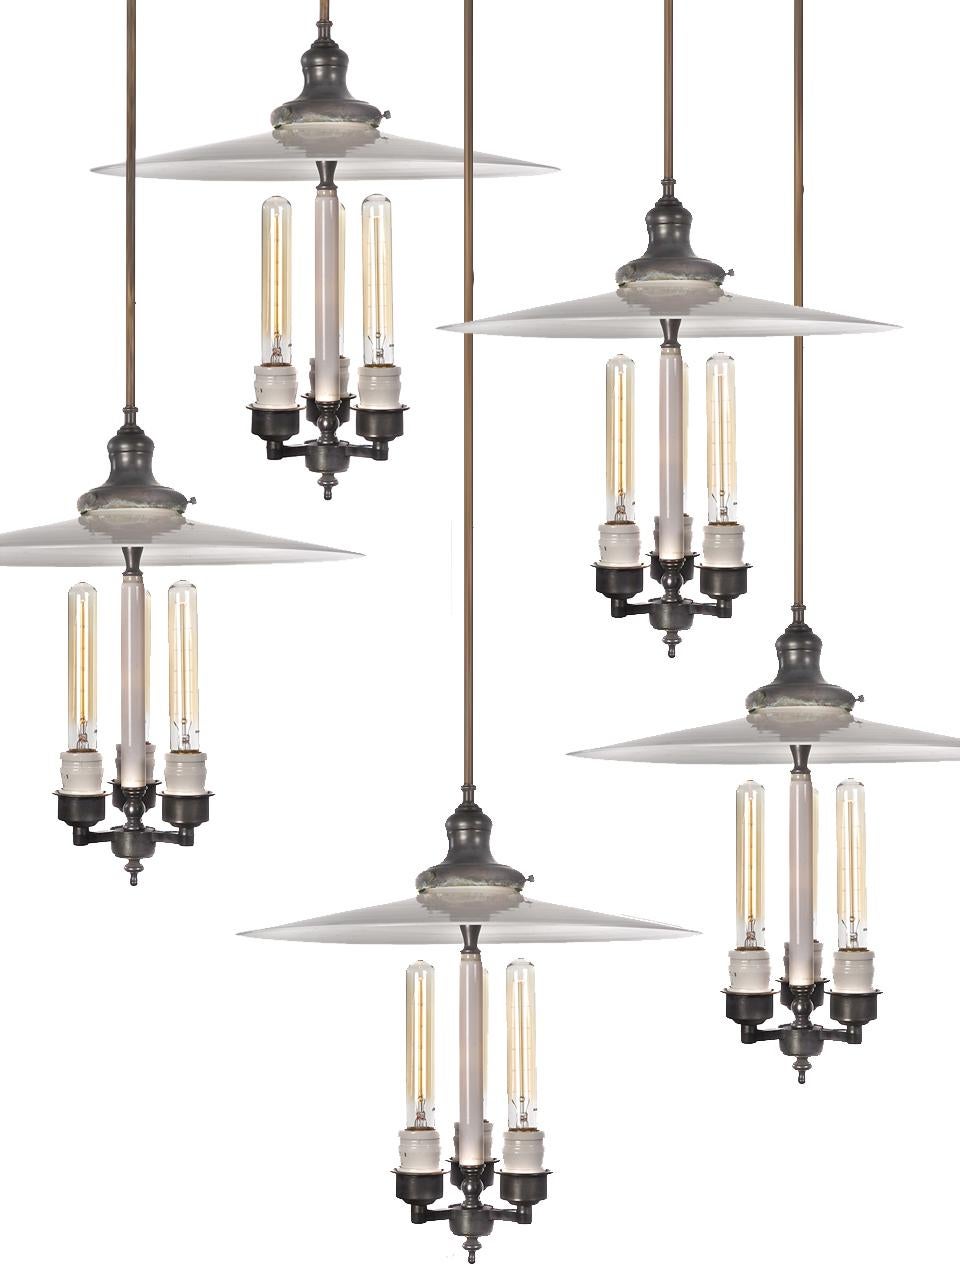 We have a nice collection if these three-bulb chandeliers. Because the large milk glass shades are hand blown there will be slight differences. The center pillar on each lamp is milk glass as well. That center works as an additional reflector and